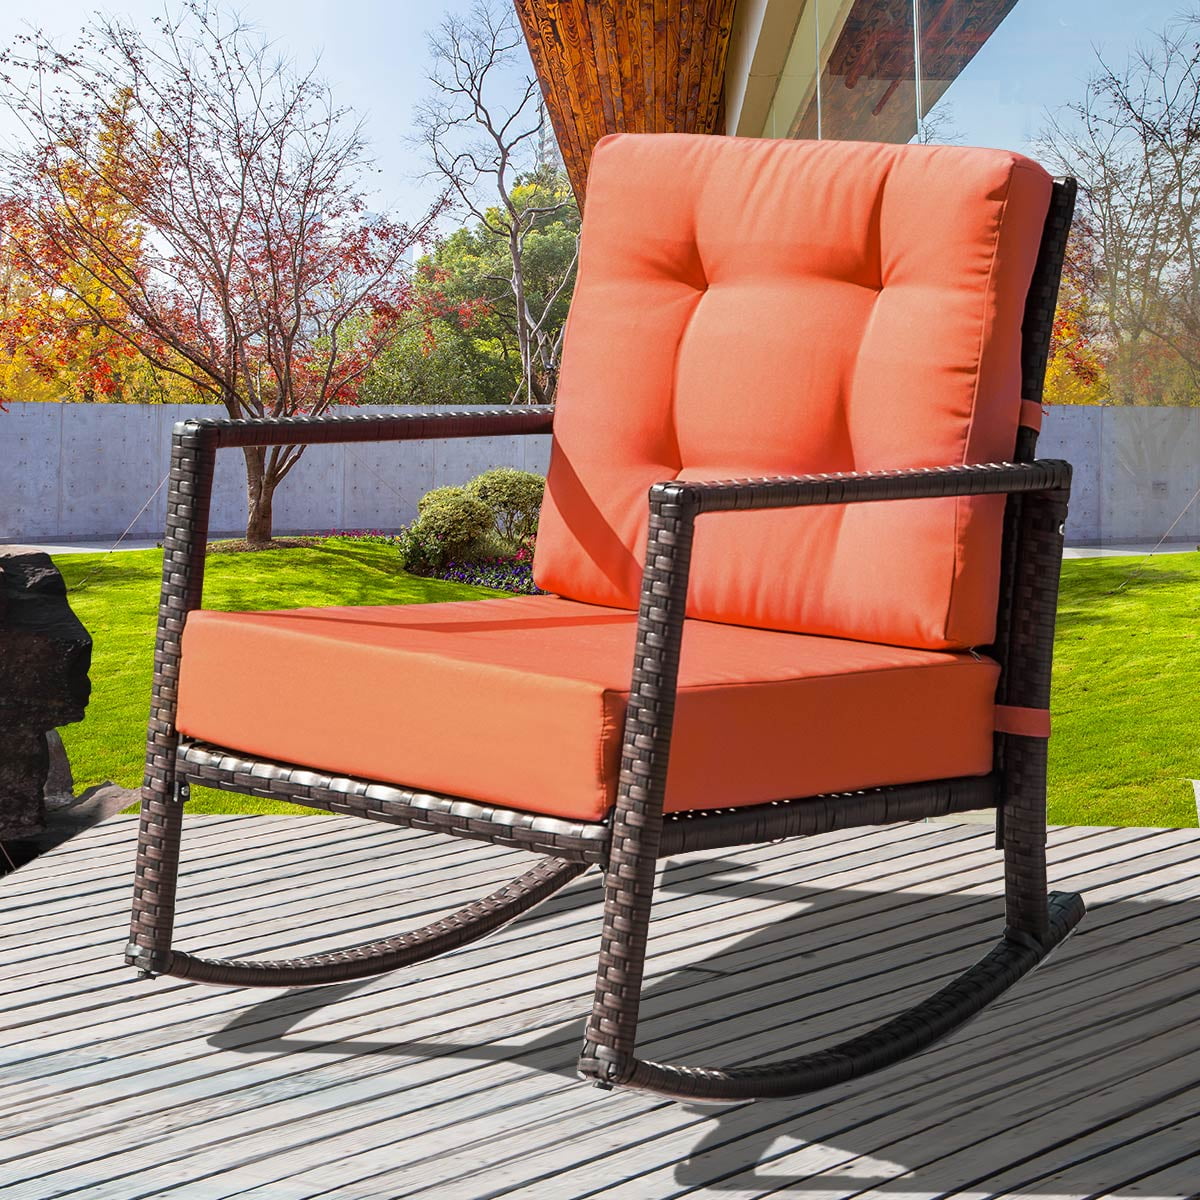 Wicker Patio Rocking Chair, Outdoor Patio Furniture Conversation
Chairs, Metal Rocking Outdoors